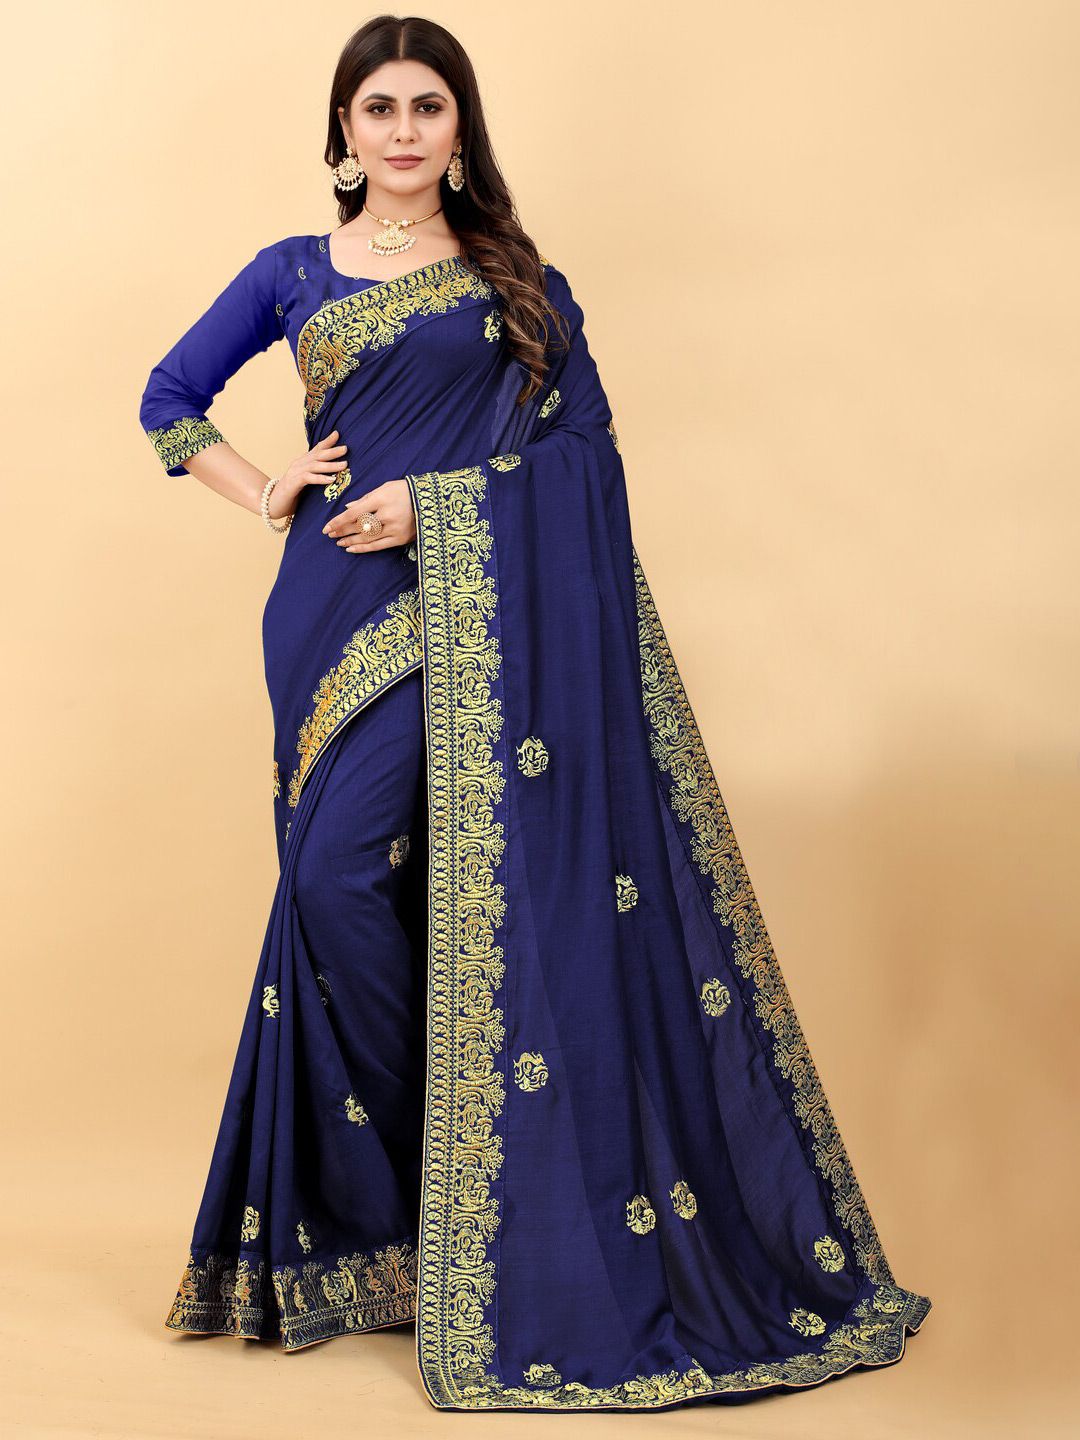 Monrav Navy Blue & Gold-Toned Ethnic Motifs Embroidered Silk Blend Saree Price in India